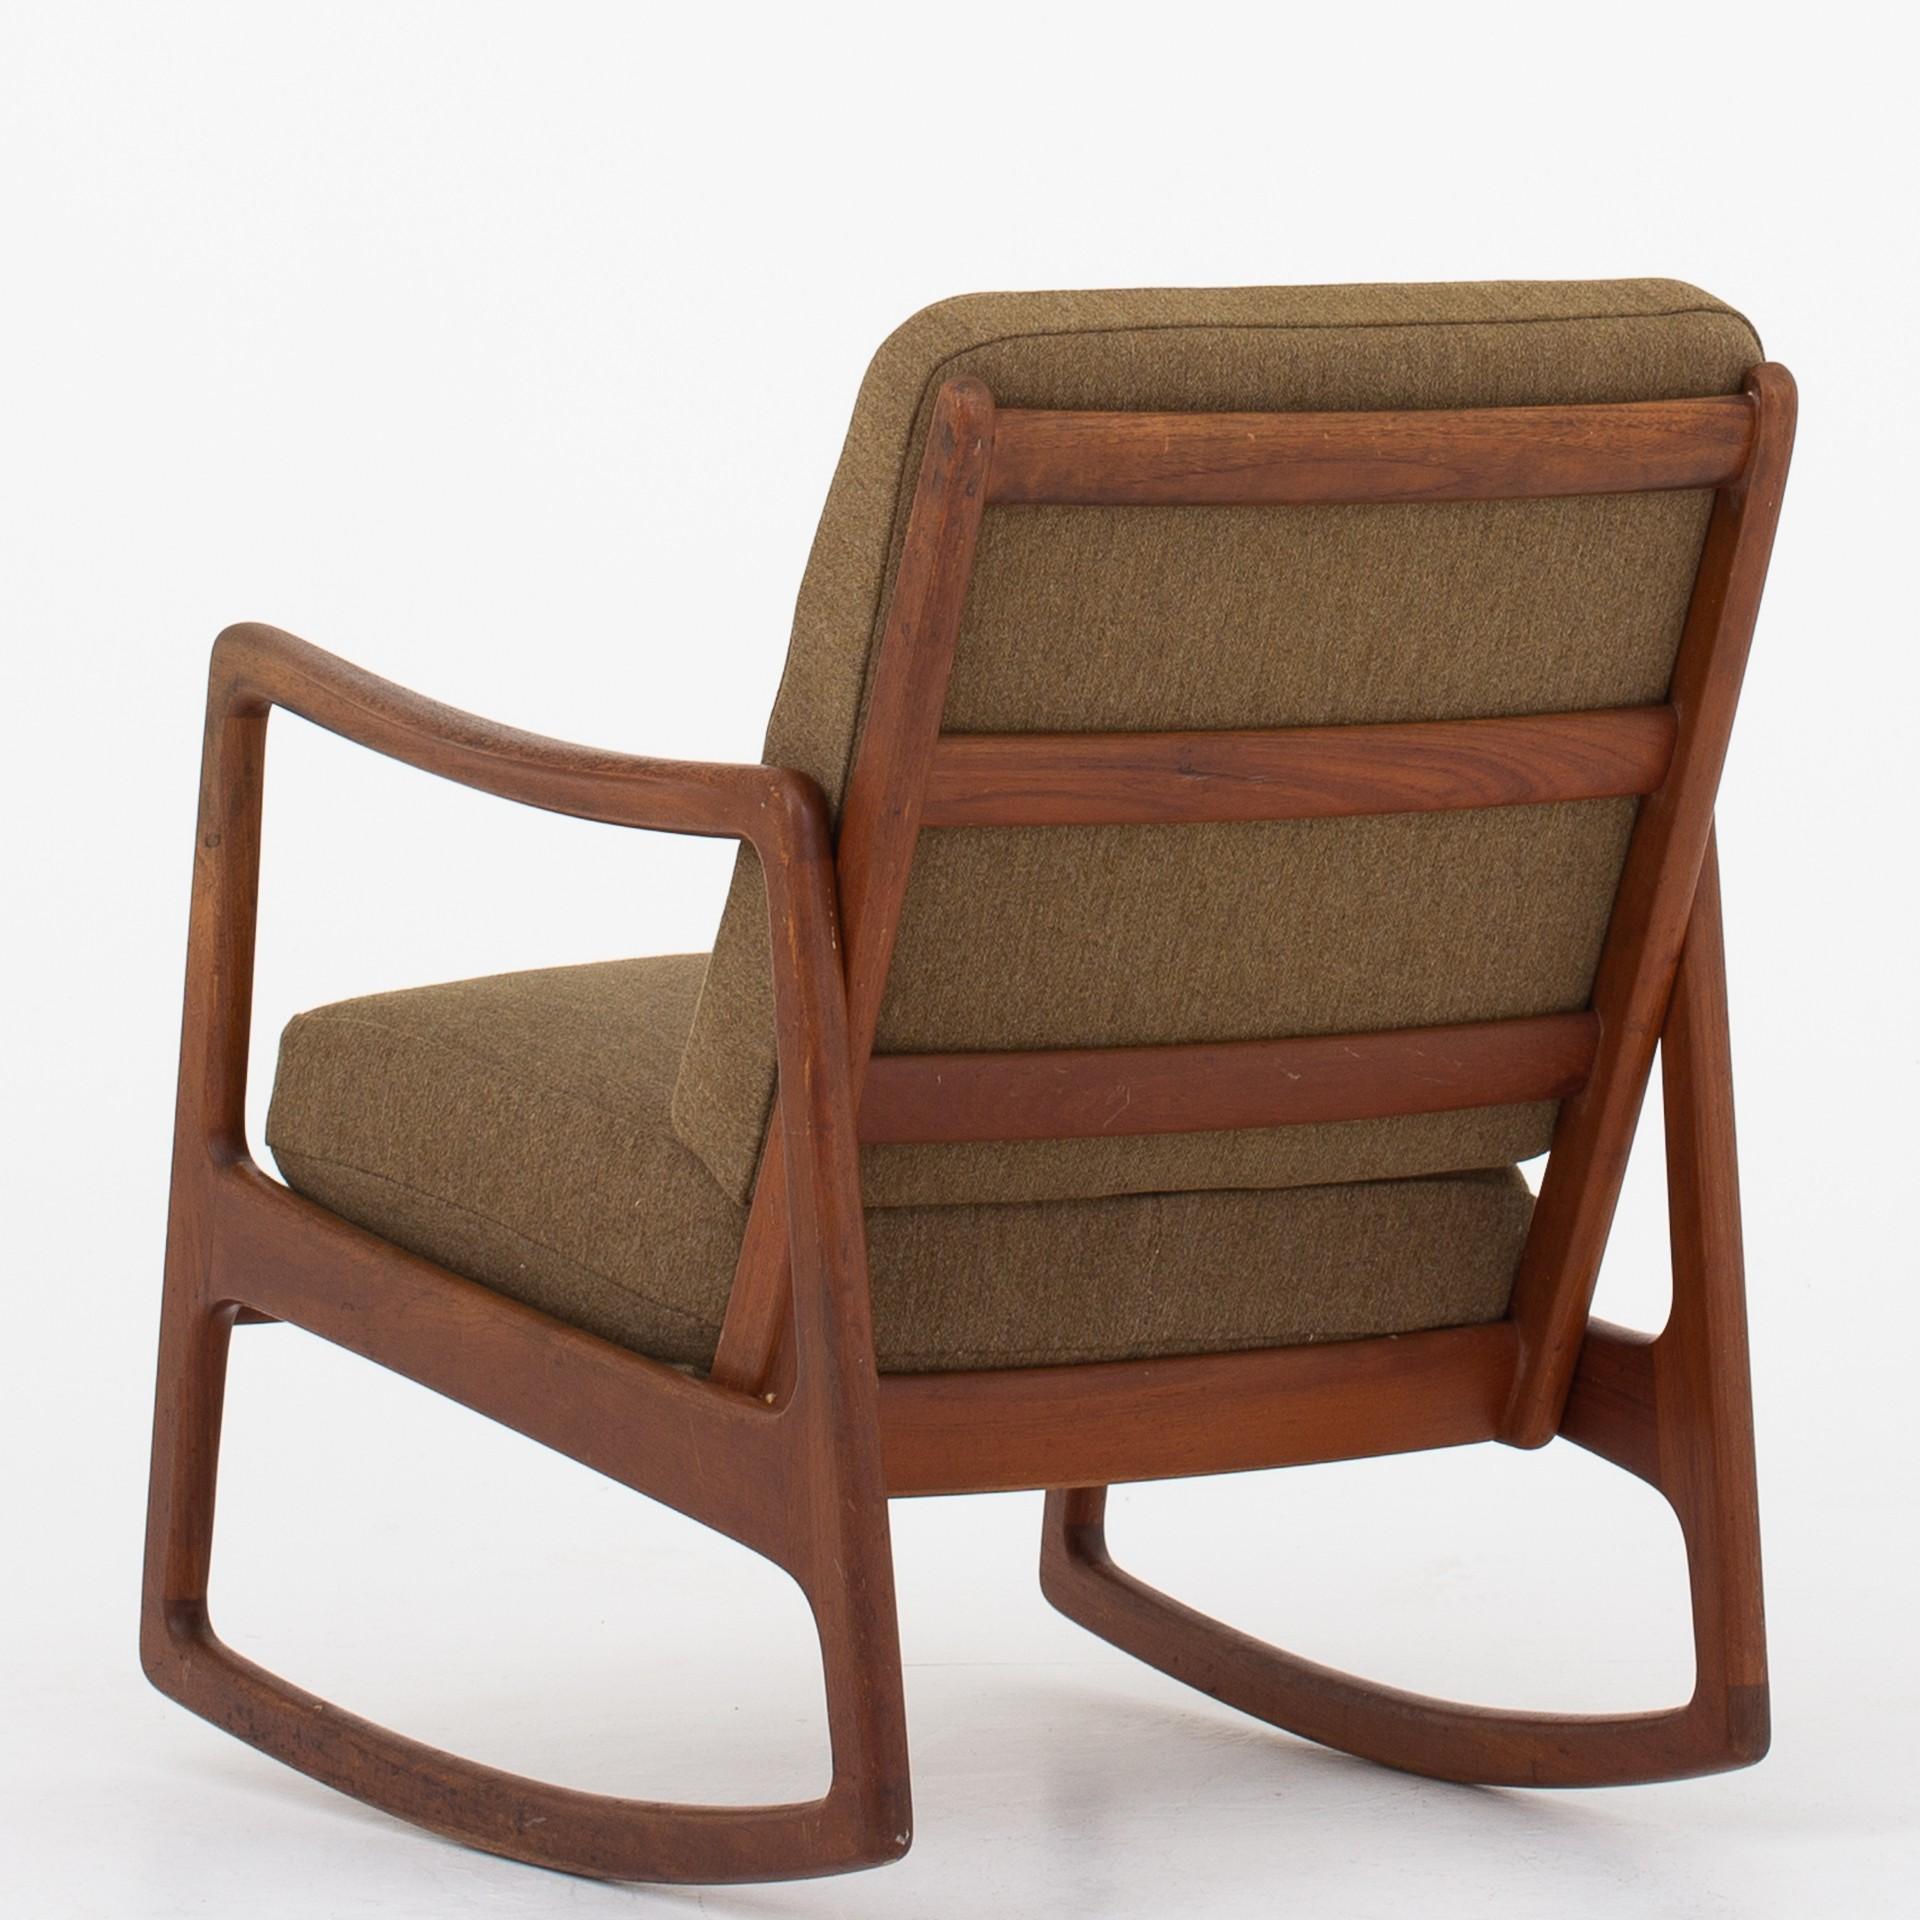 FD 110 - Rocking chair in teak with brown cushions of wool. Maker France & Daverkosen. Designed 1951.